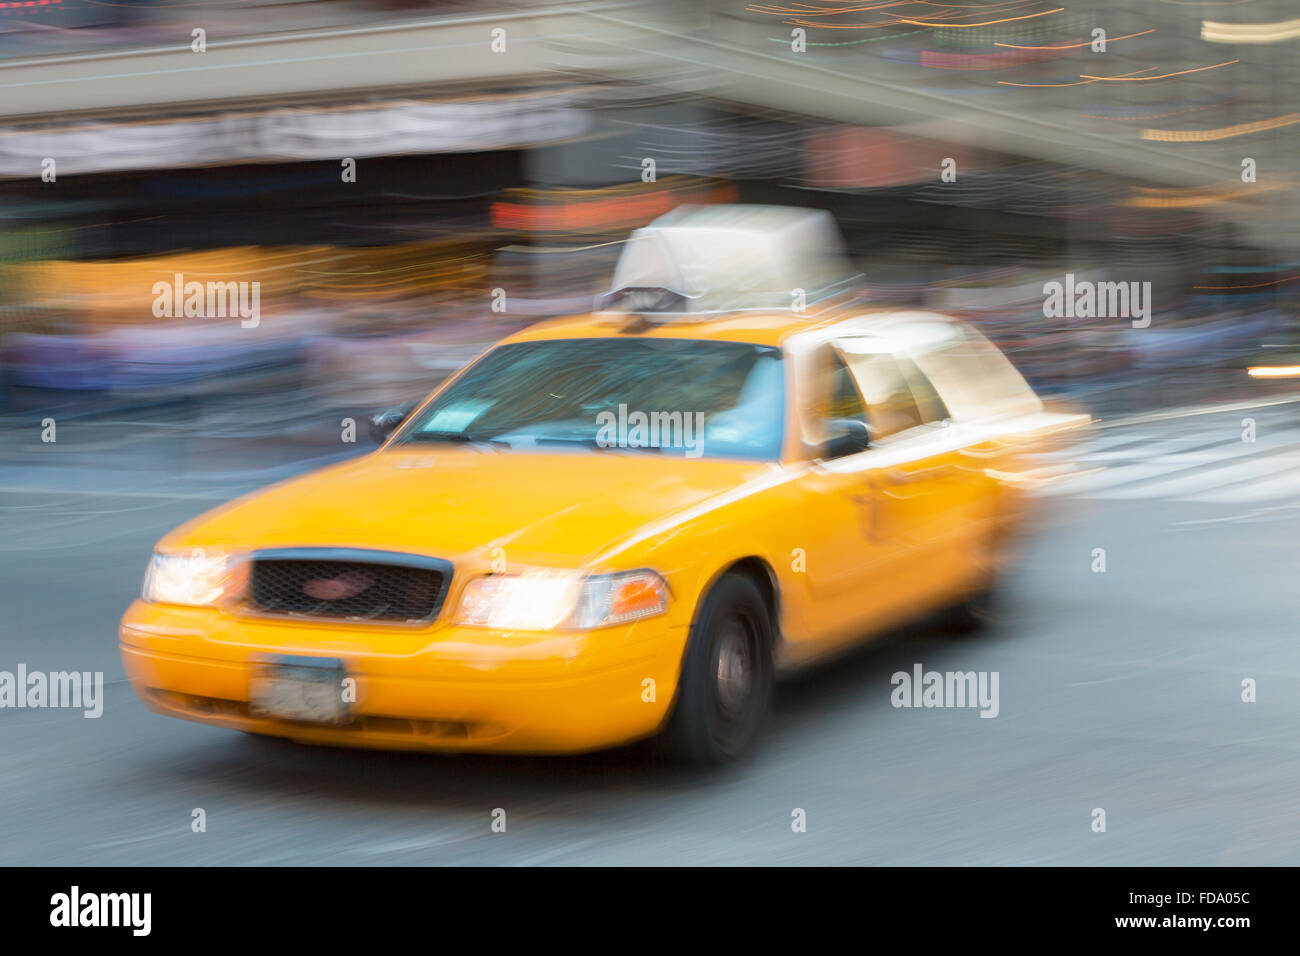 Taxi-Pfanne-Unschärfe in Times Square, New York. Stockfoto